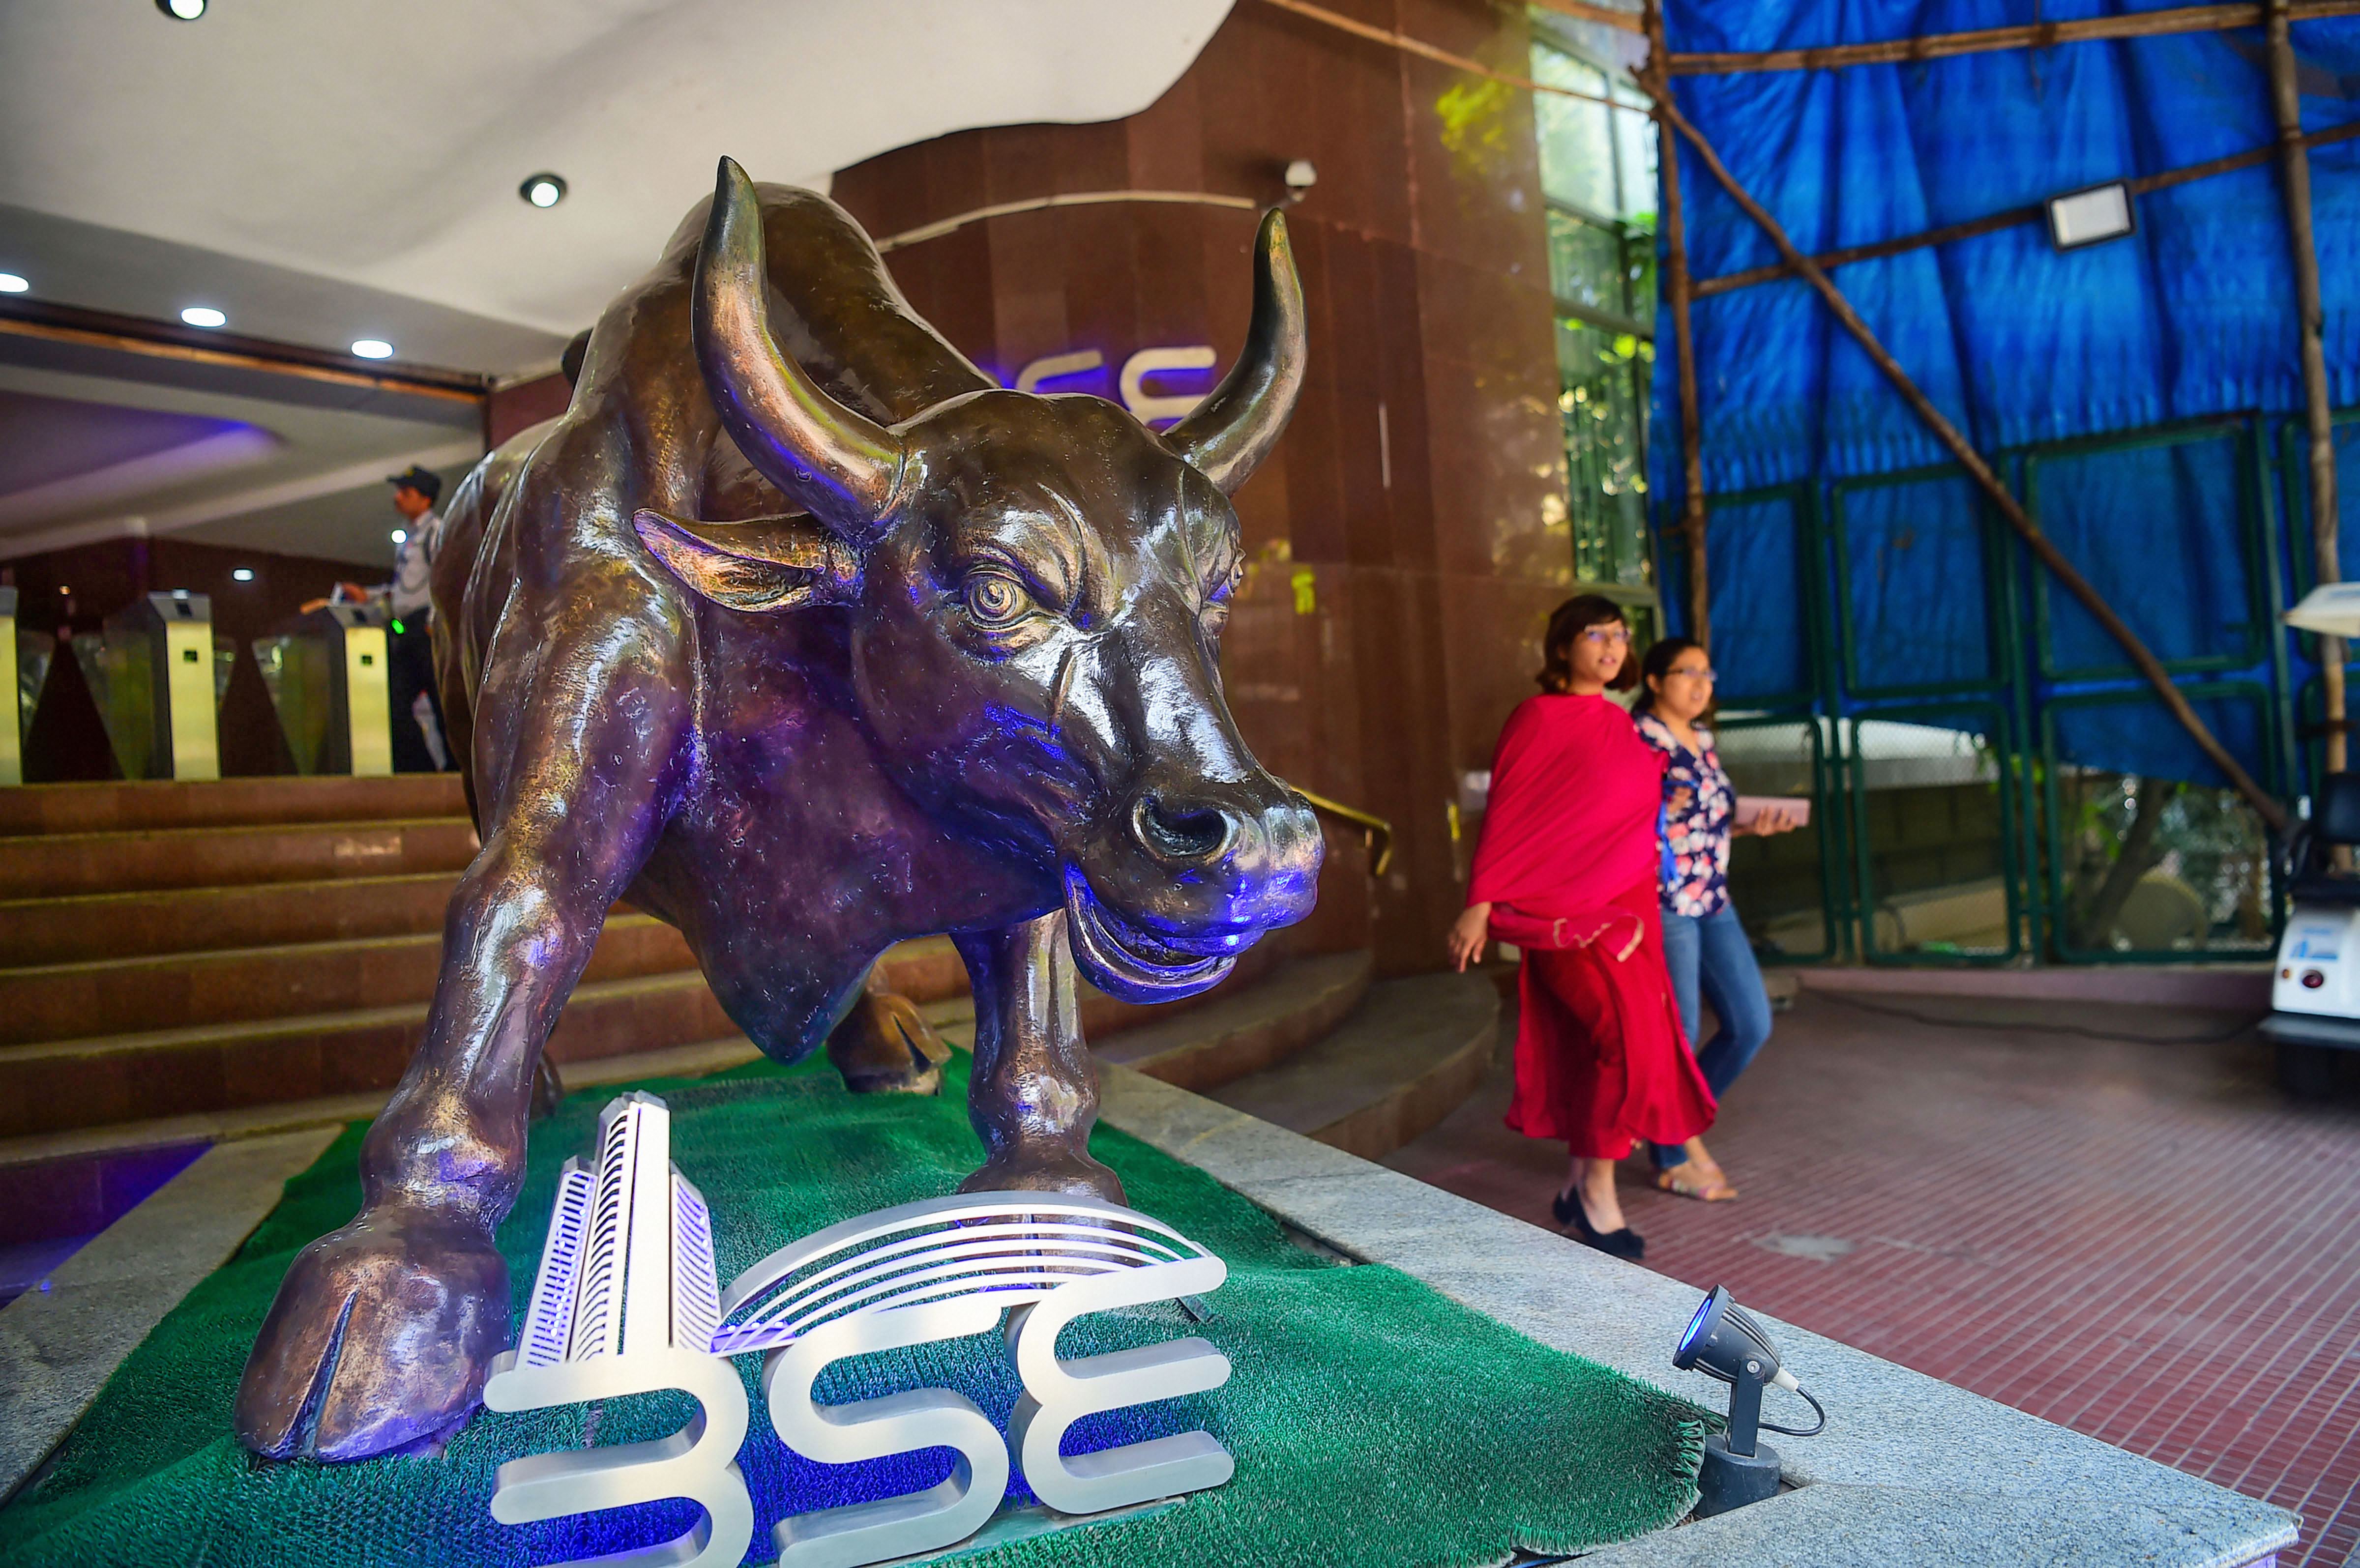 Sensex drops 152 points in volatile trade amid mixed global cues